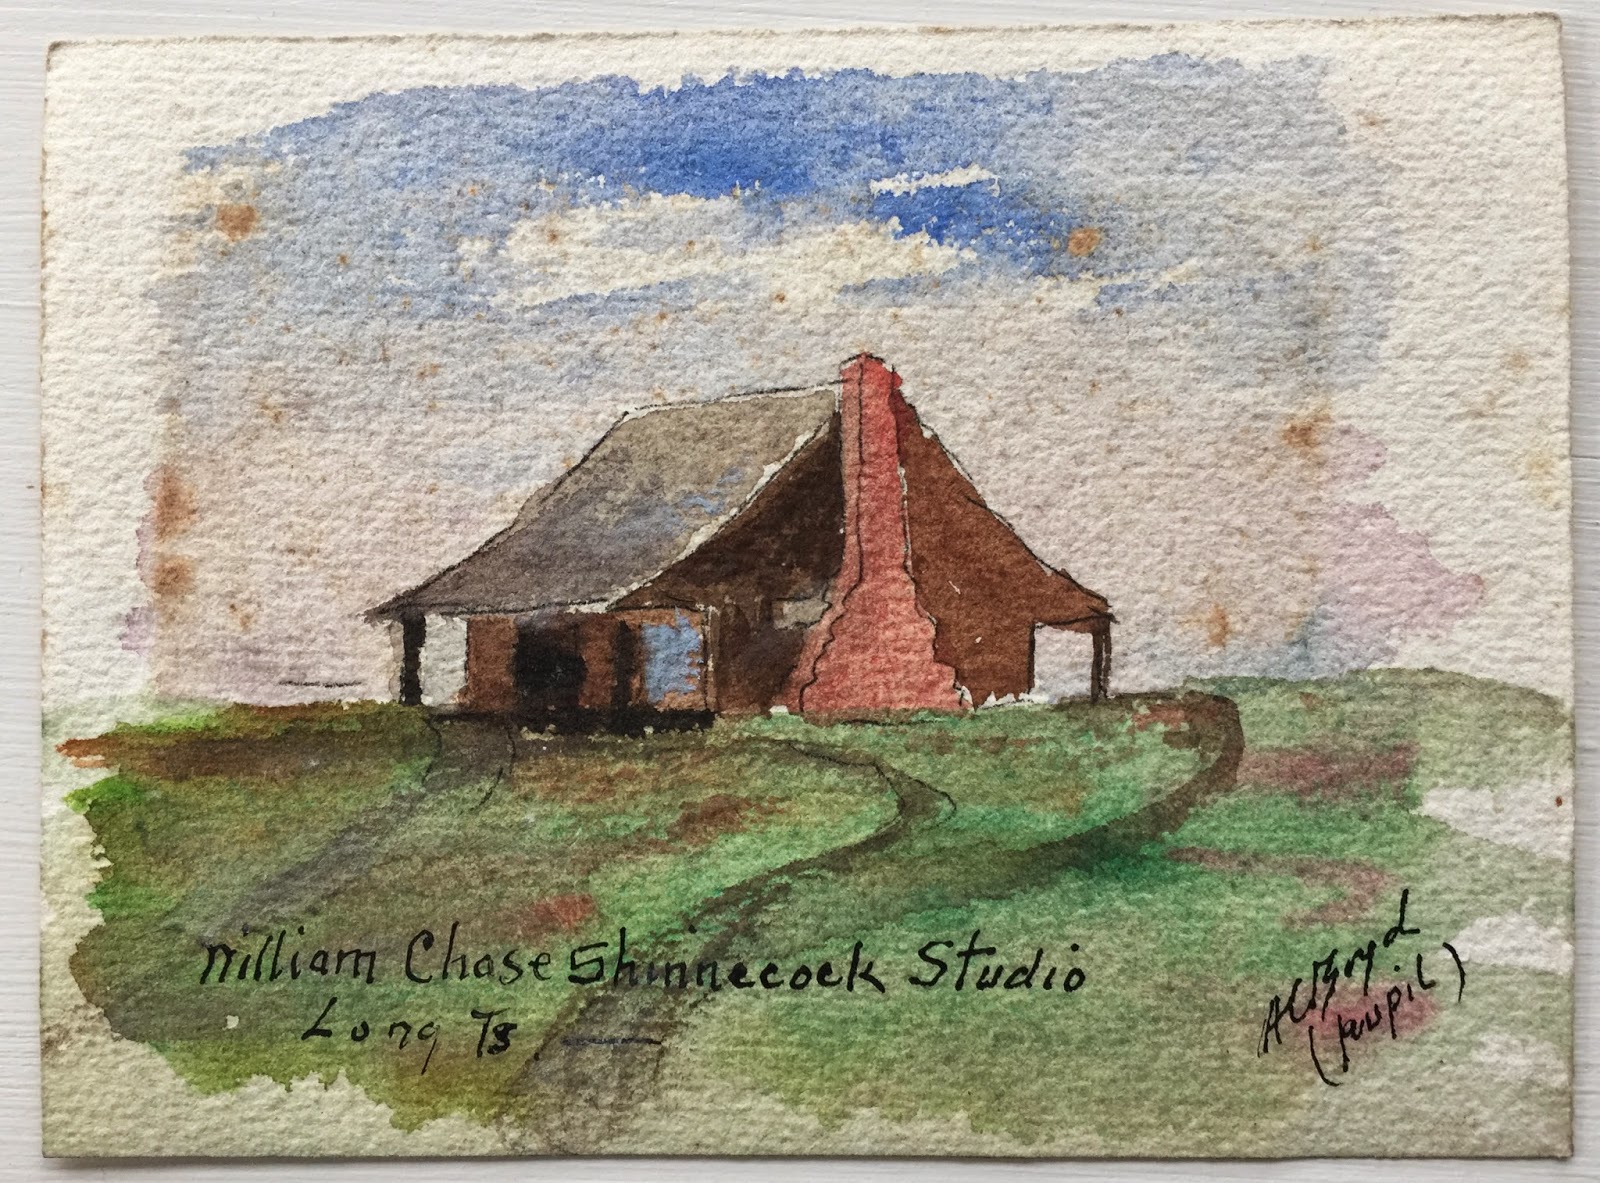 William Chase Shinnecock Studio by Annie Cooper Boyd - ca. 1891-1902 Sag Harbor Historical Society